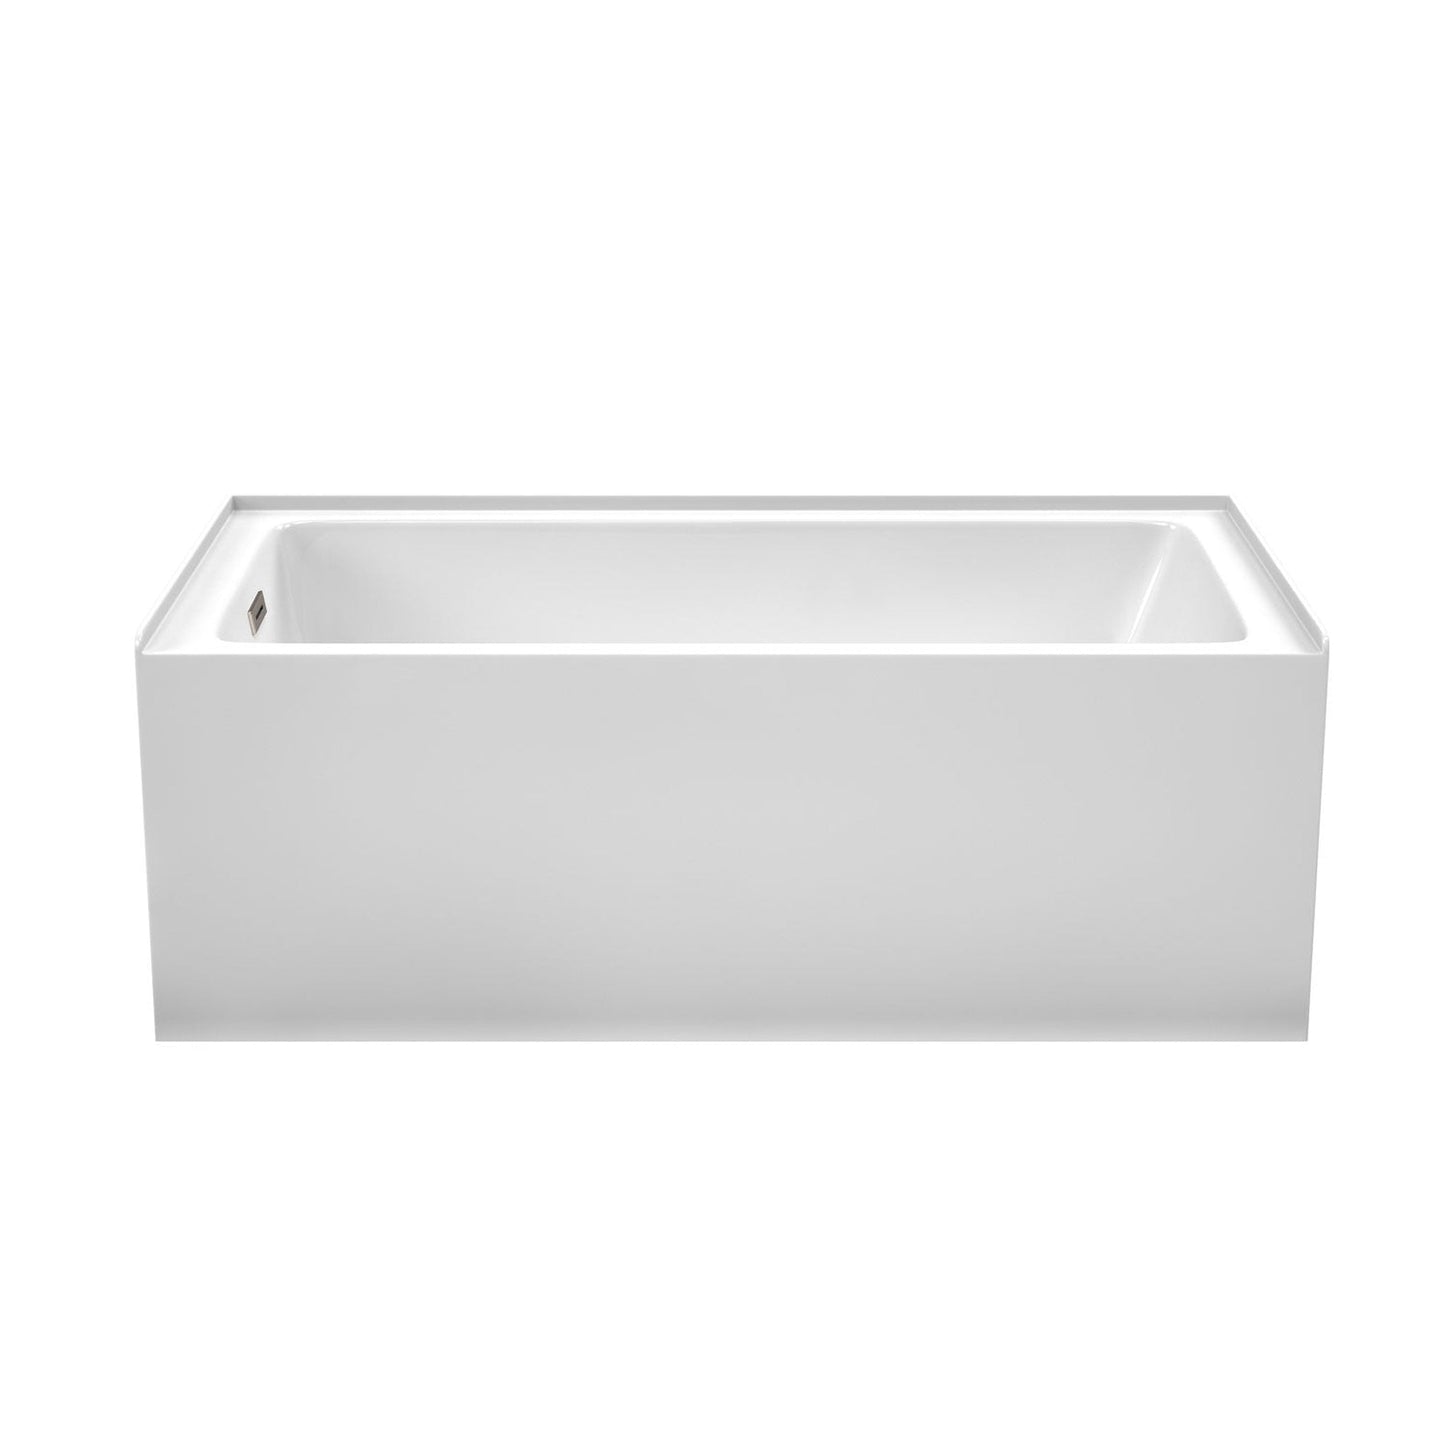 Wyndham Collection Grayley 60" x 32" Alcove Bathtub in White With Left-Hand Drain and Overflow Trim in Brushed Nickel